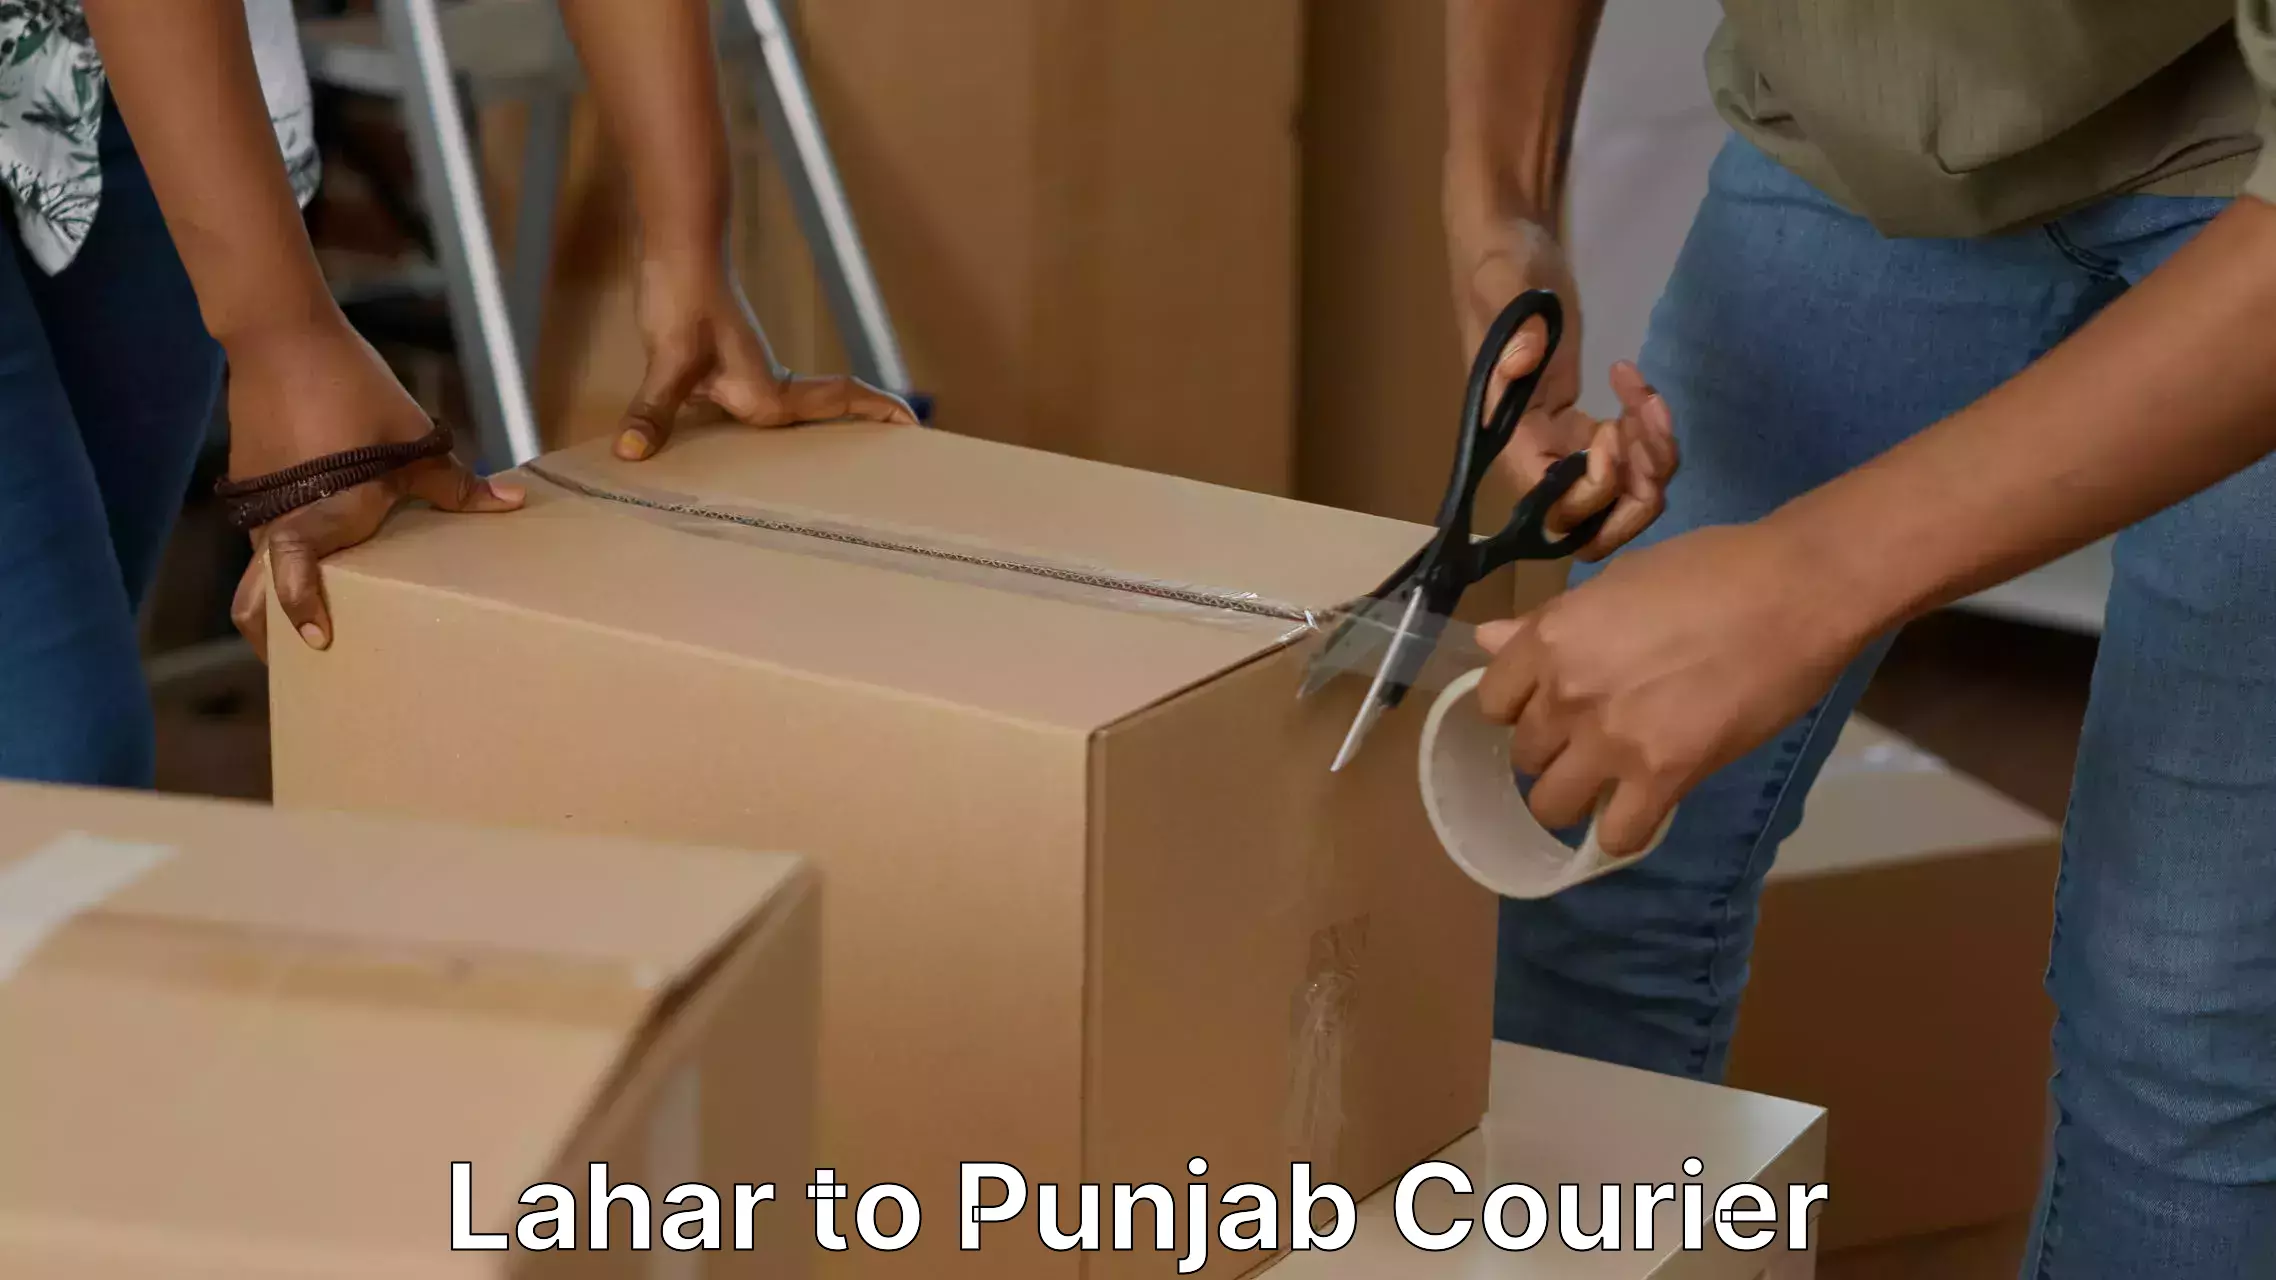 Furniture delivery service in Lahar to Punjab